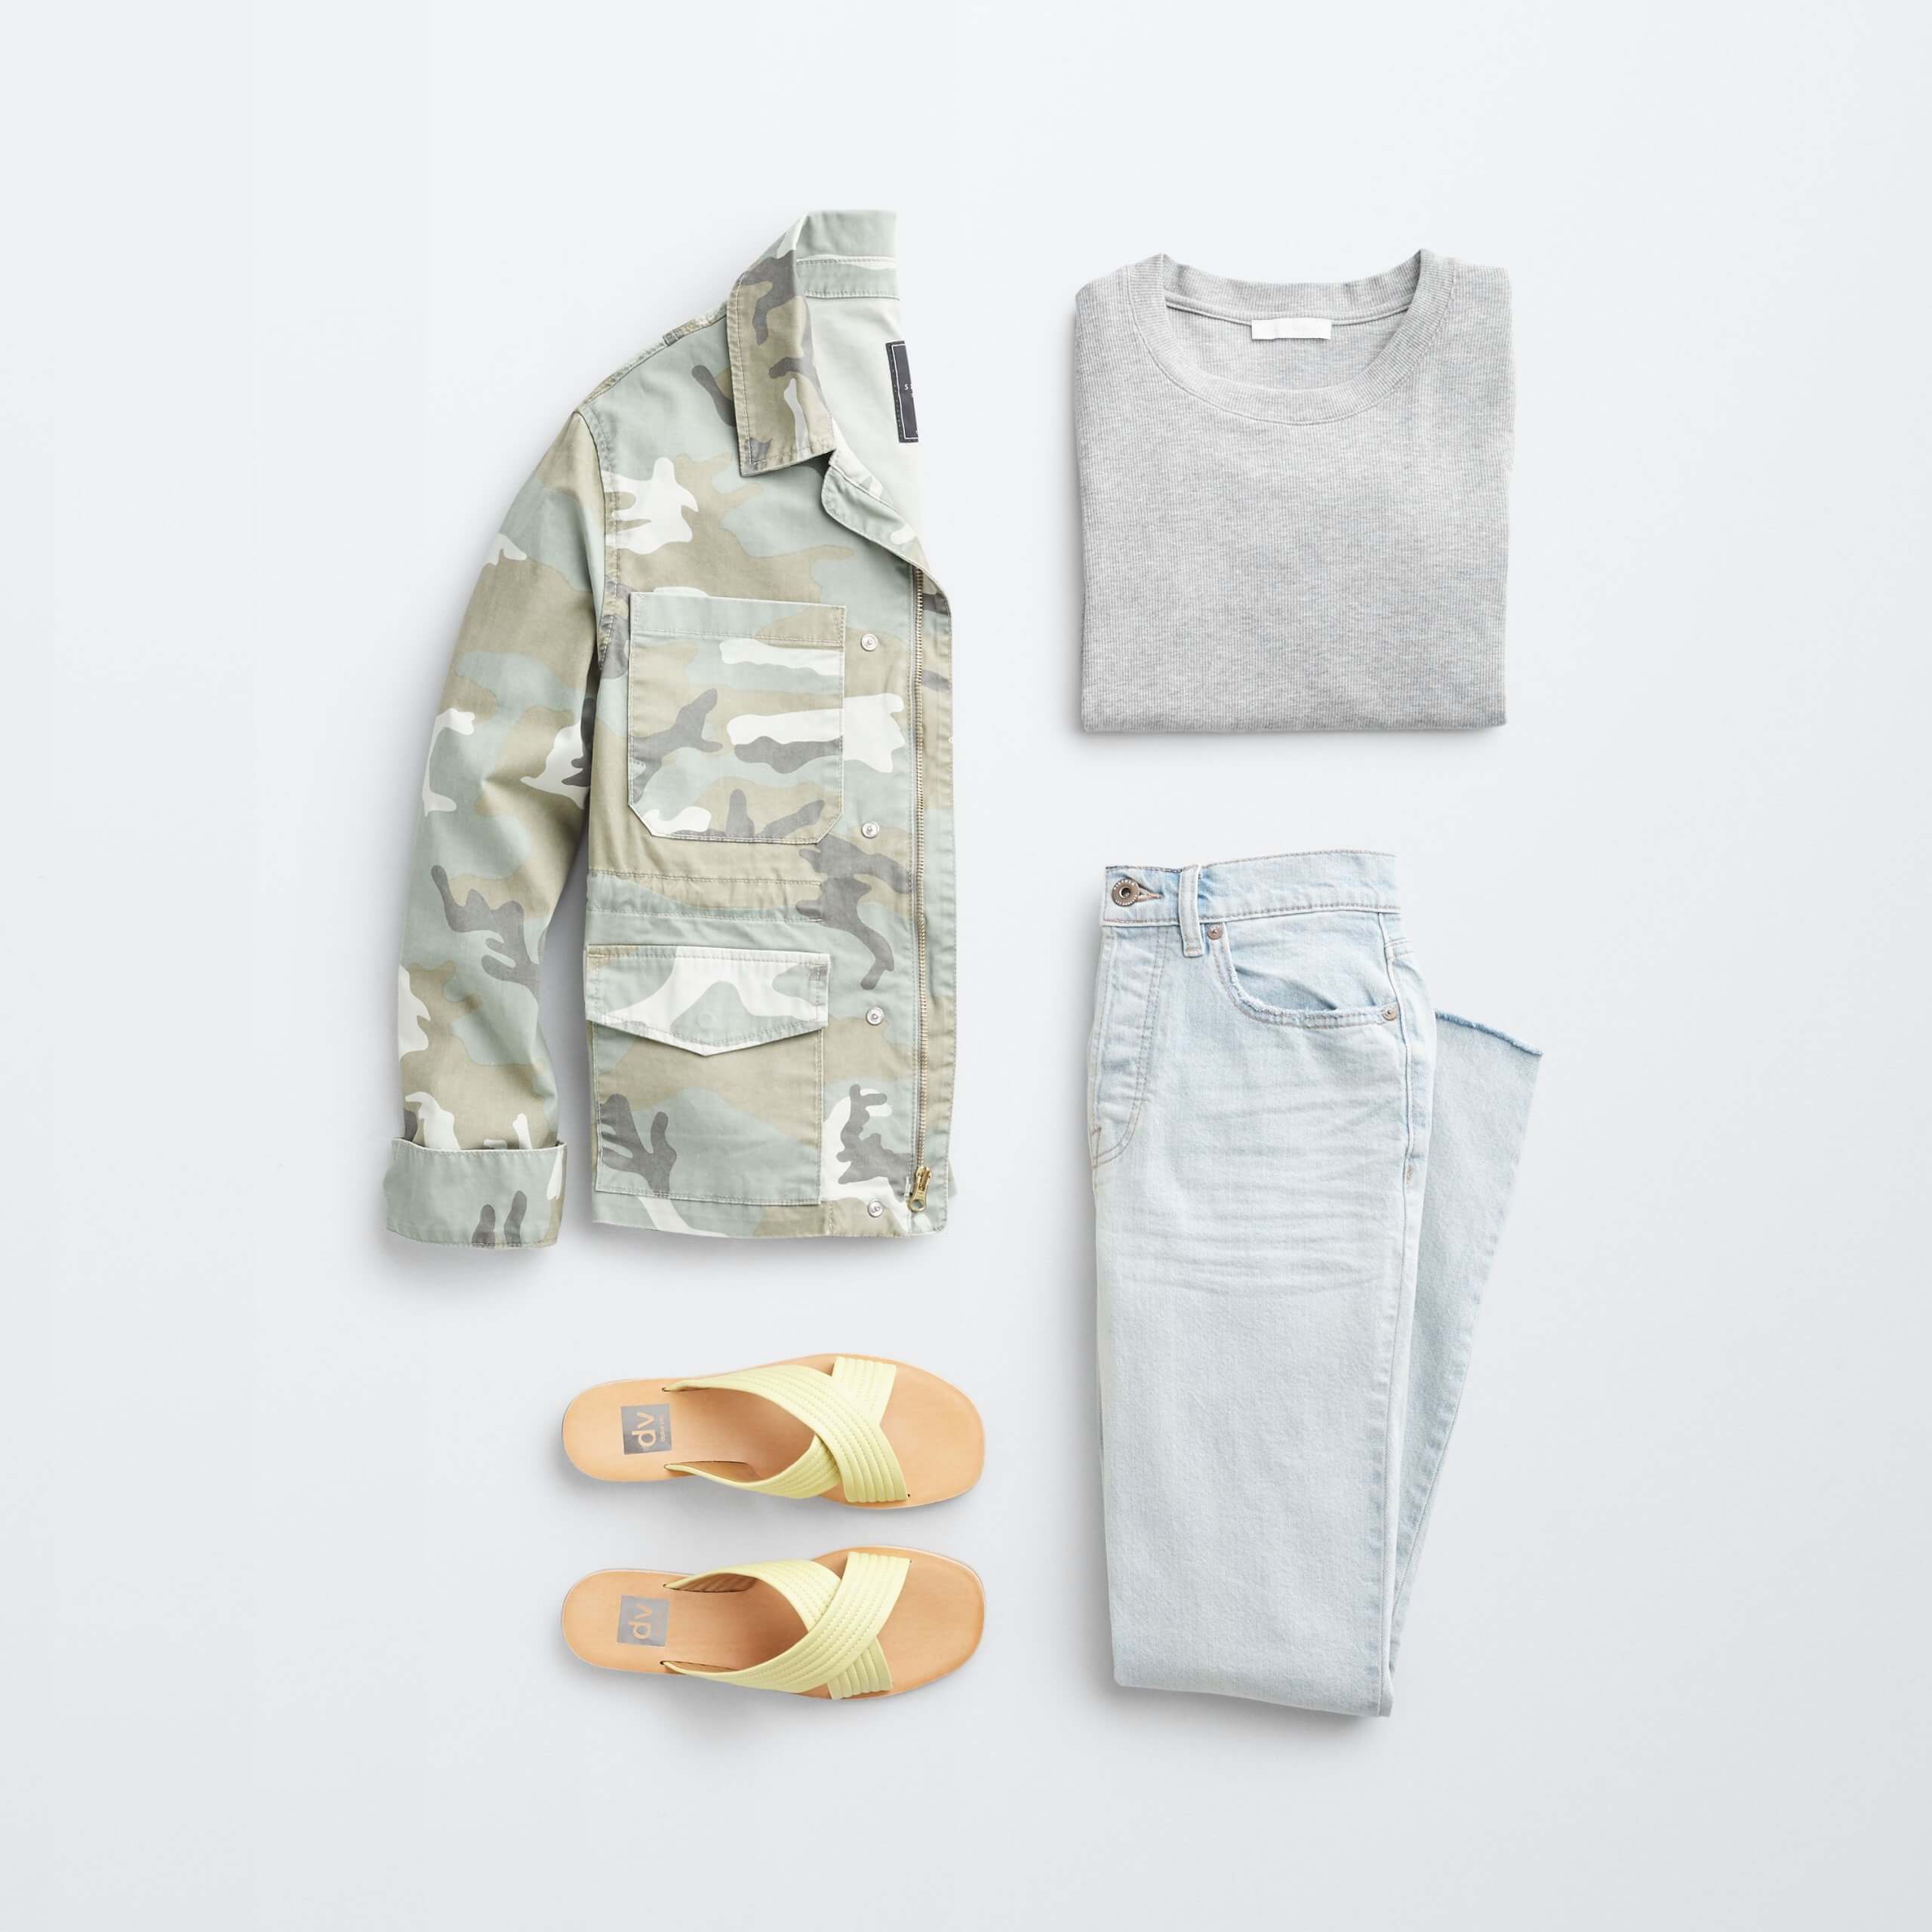 Stitch Fix women’s outfit laydown featuring green camo utility jacket, grey pullover, light wash jeans and yellow slide sandals. 